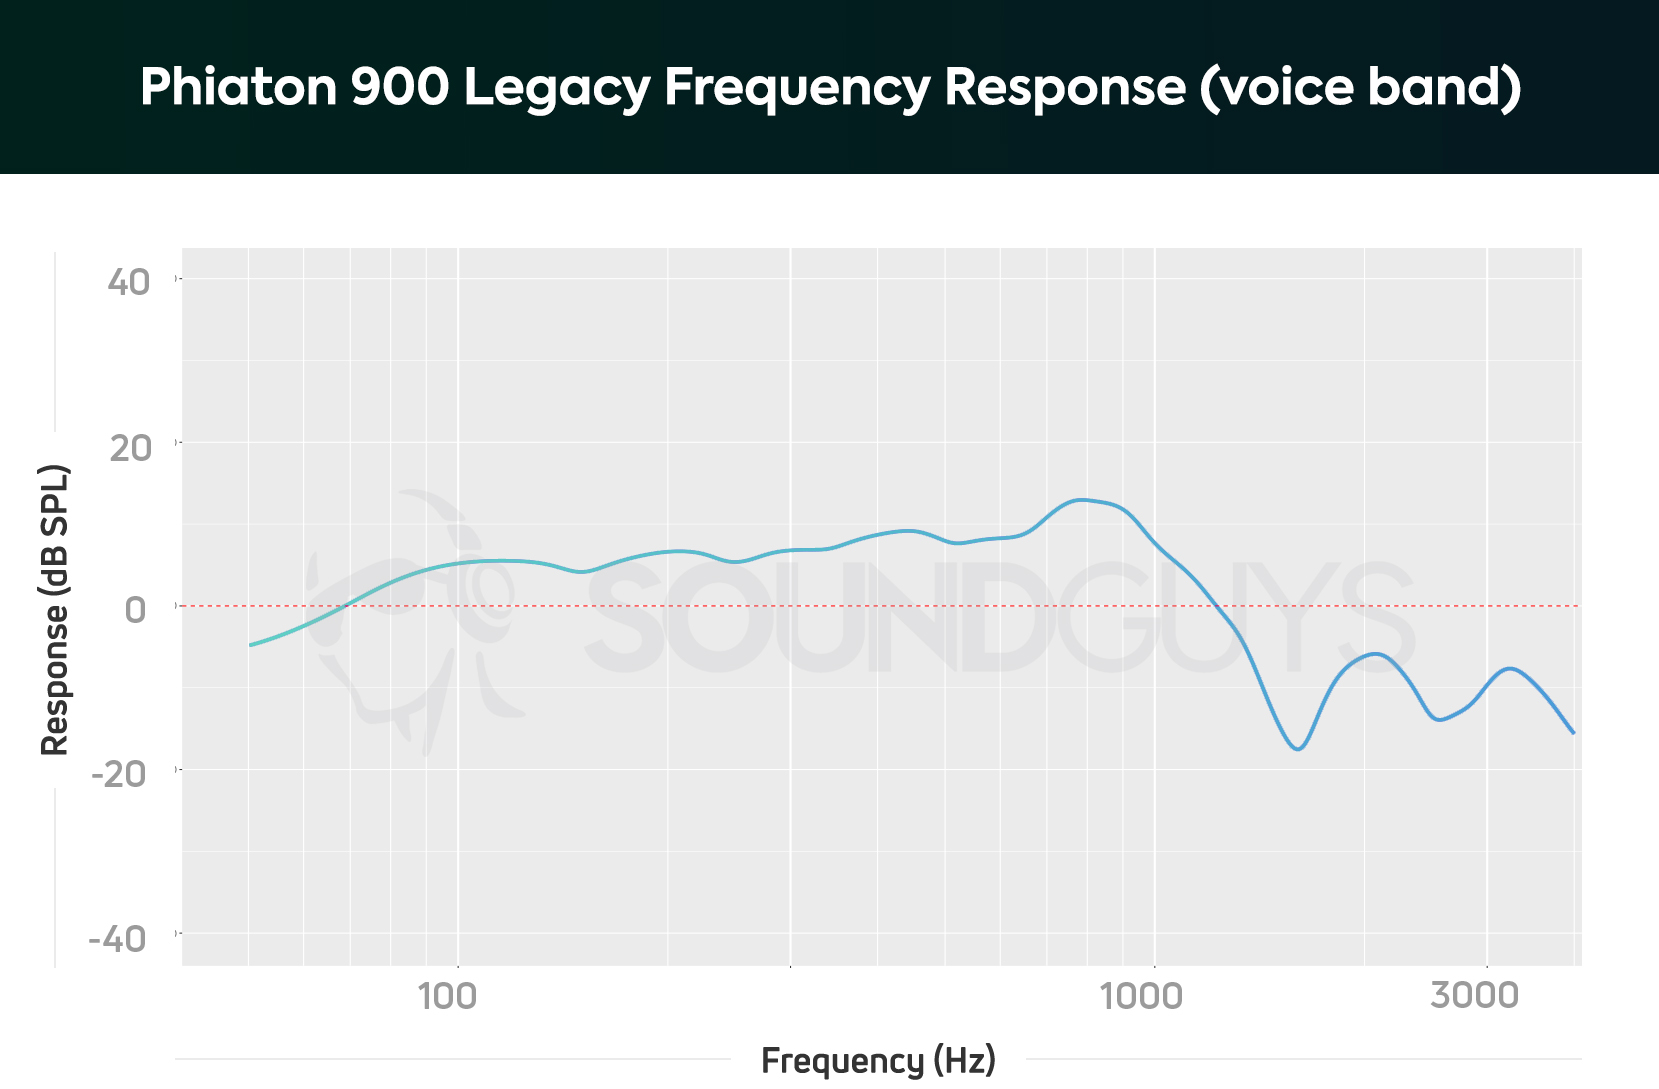 The Phiaton 900 Legacy vocal frequency response graph, which depicts amplified bass and midrange notes.